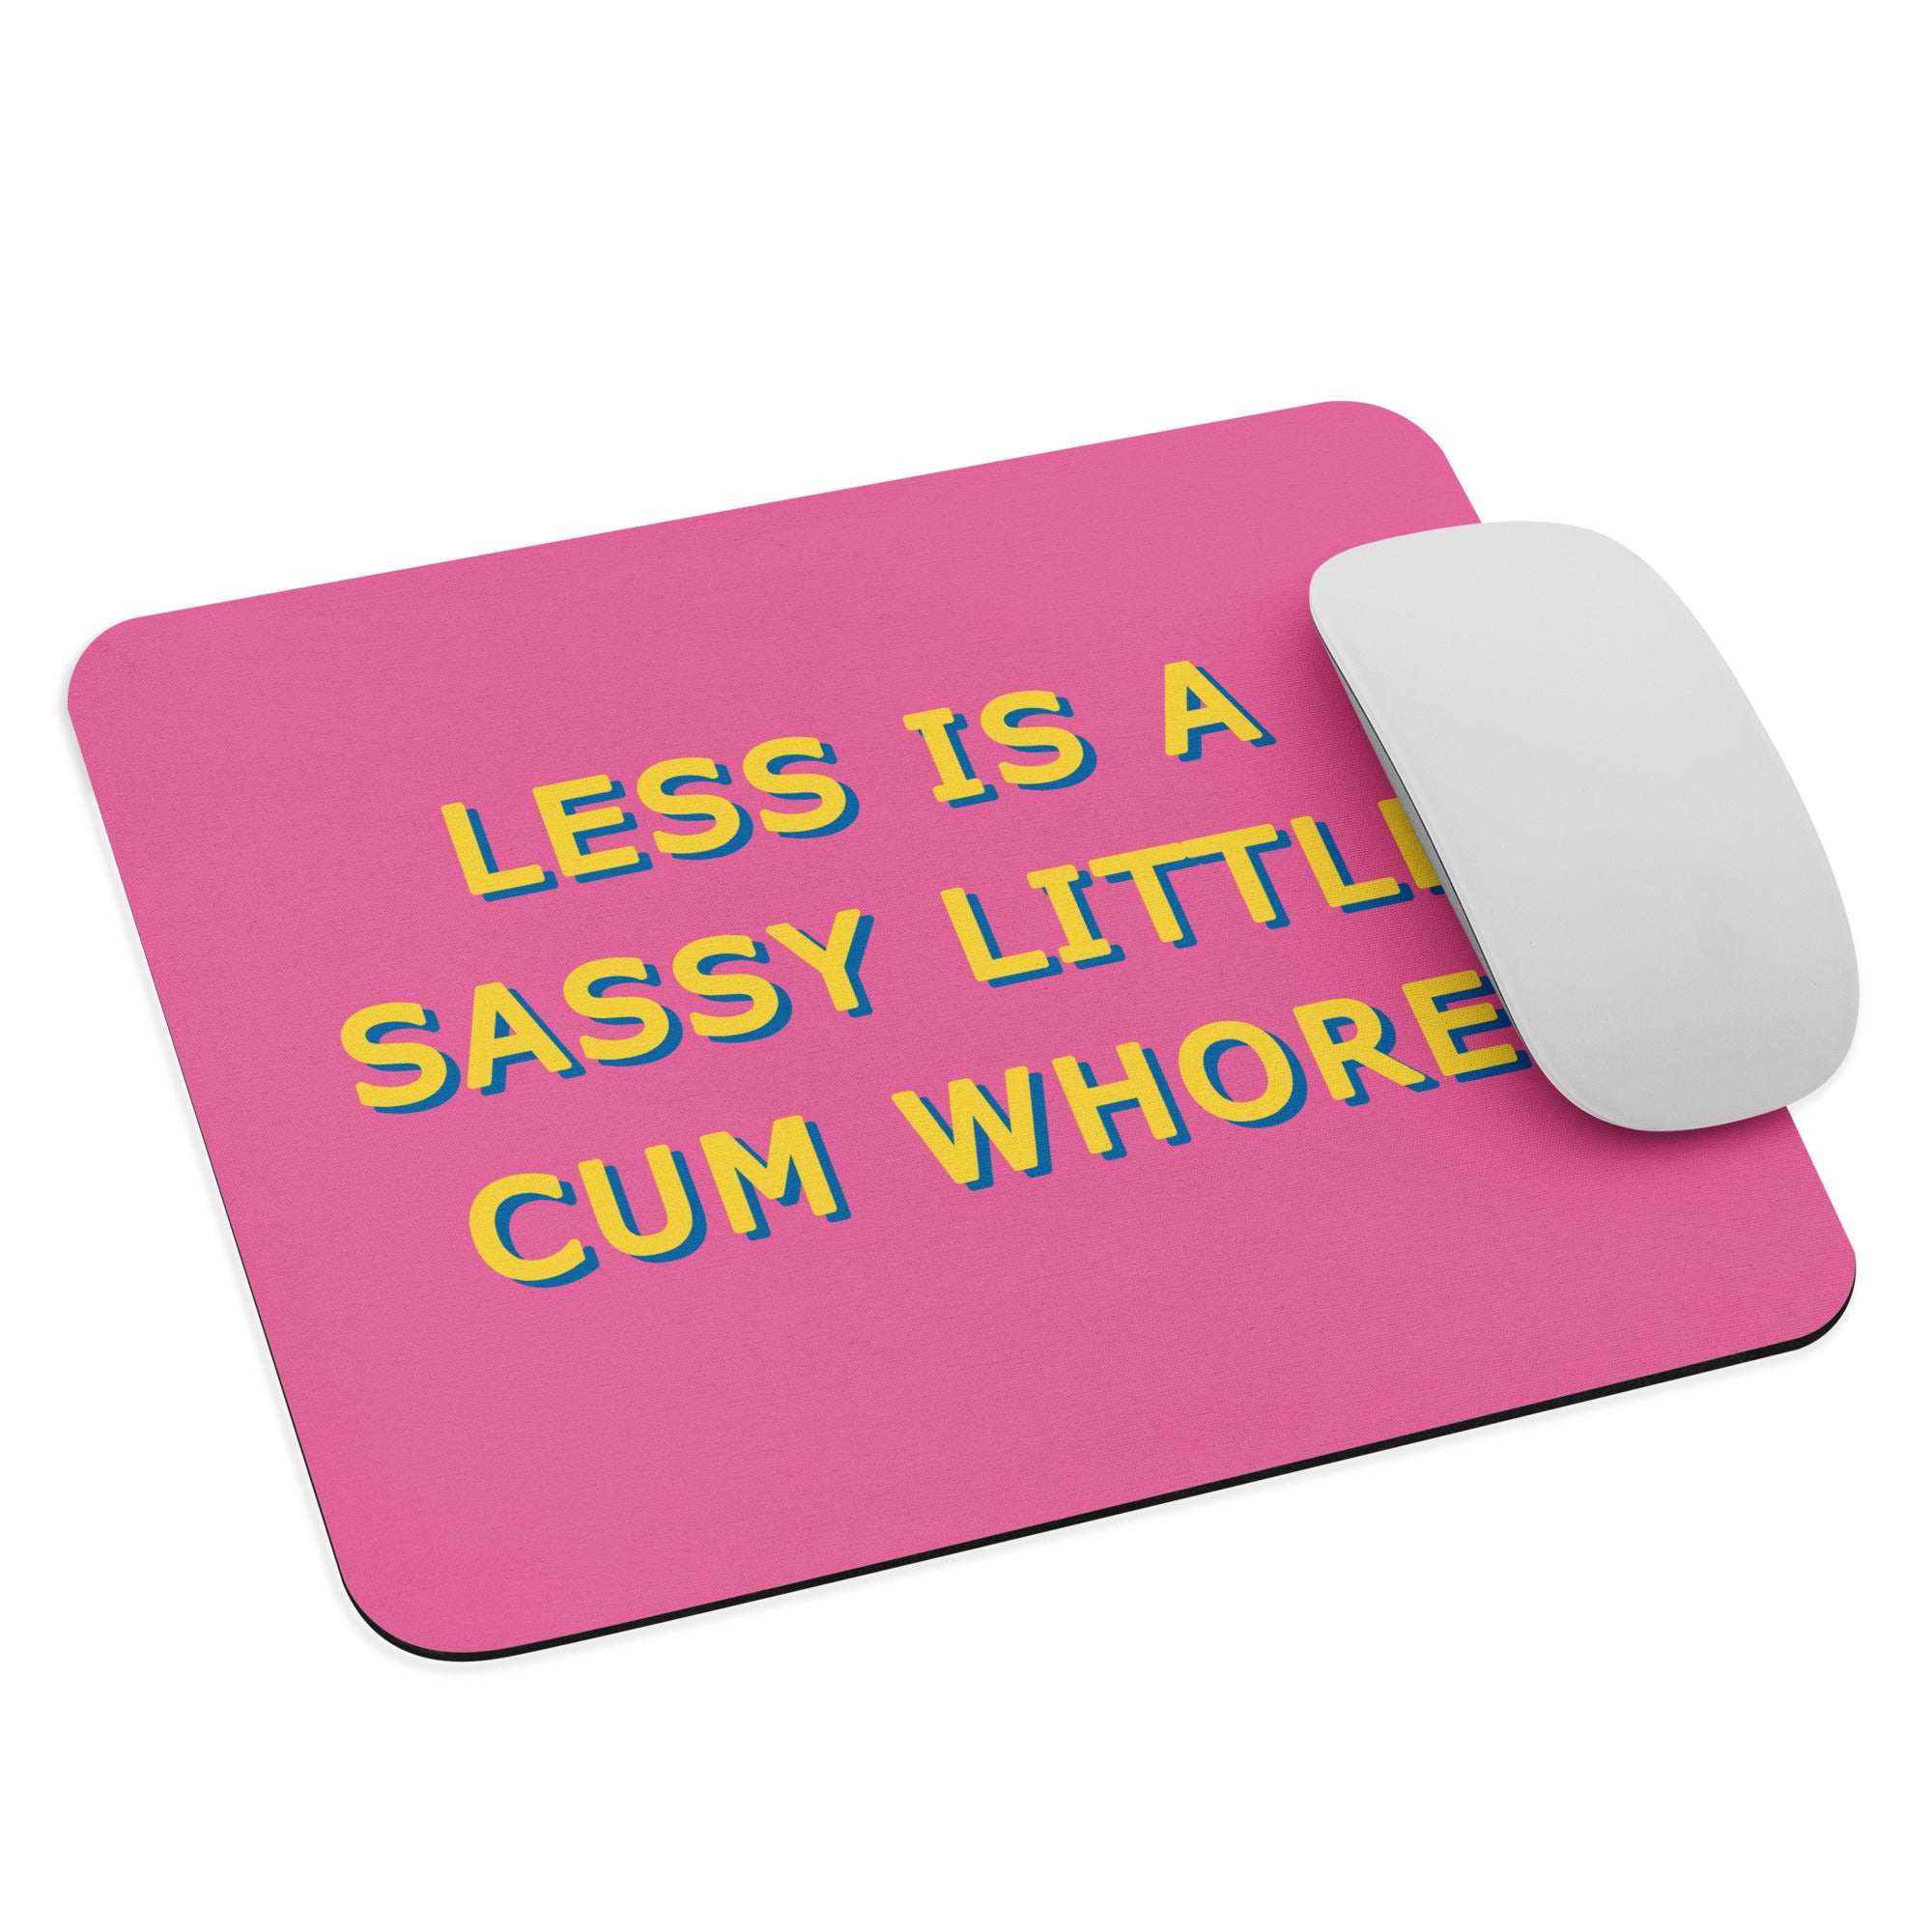 Less Is A Sassy Little Cum Whore Mouse Pad